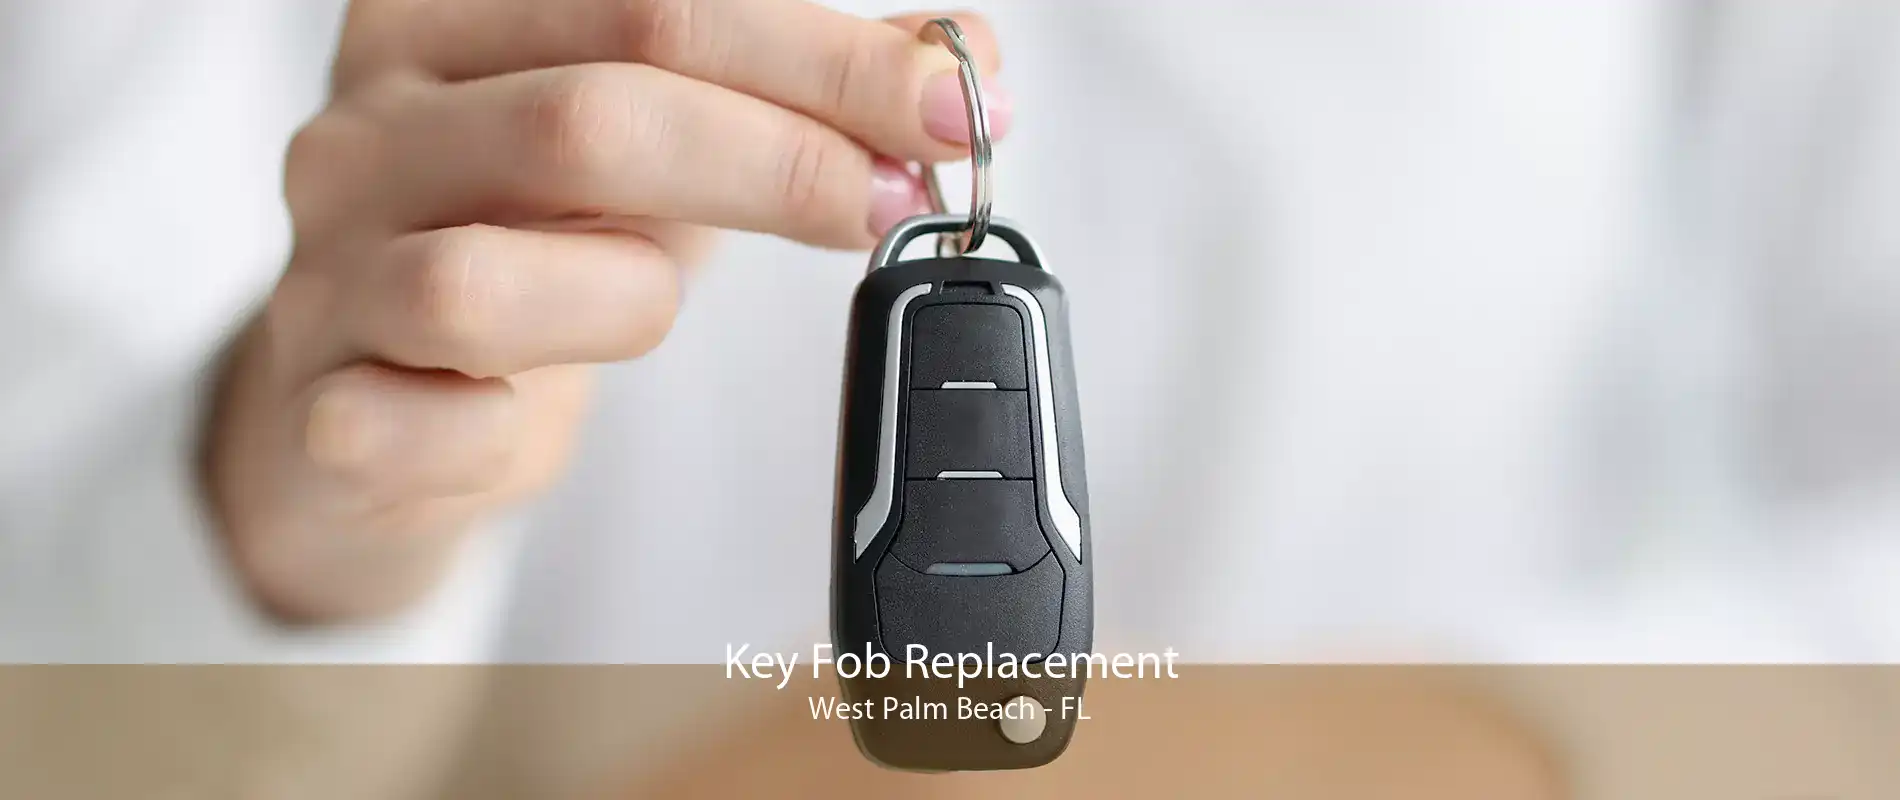 Key Fob Replacement West Palm Beach - FL